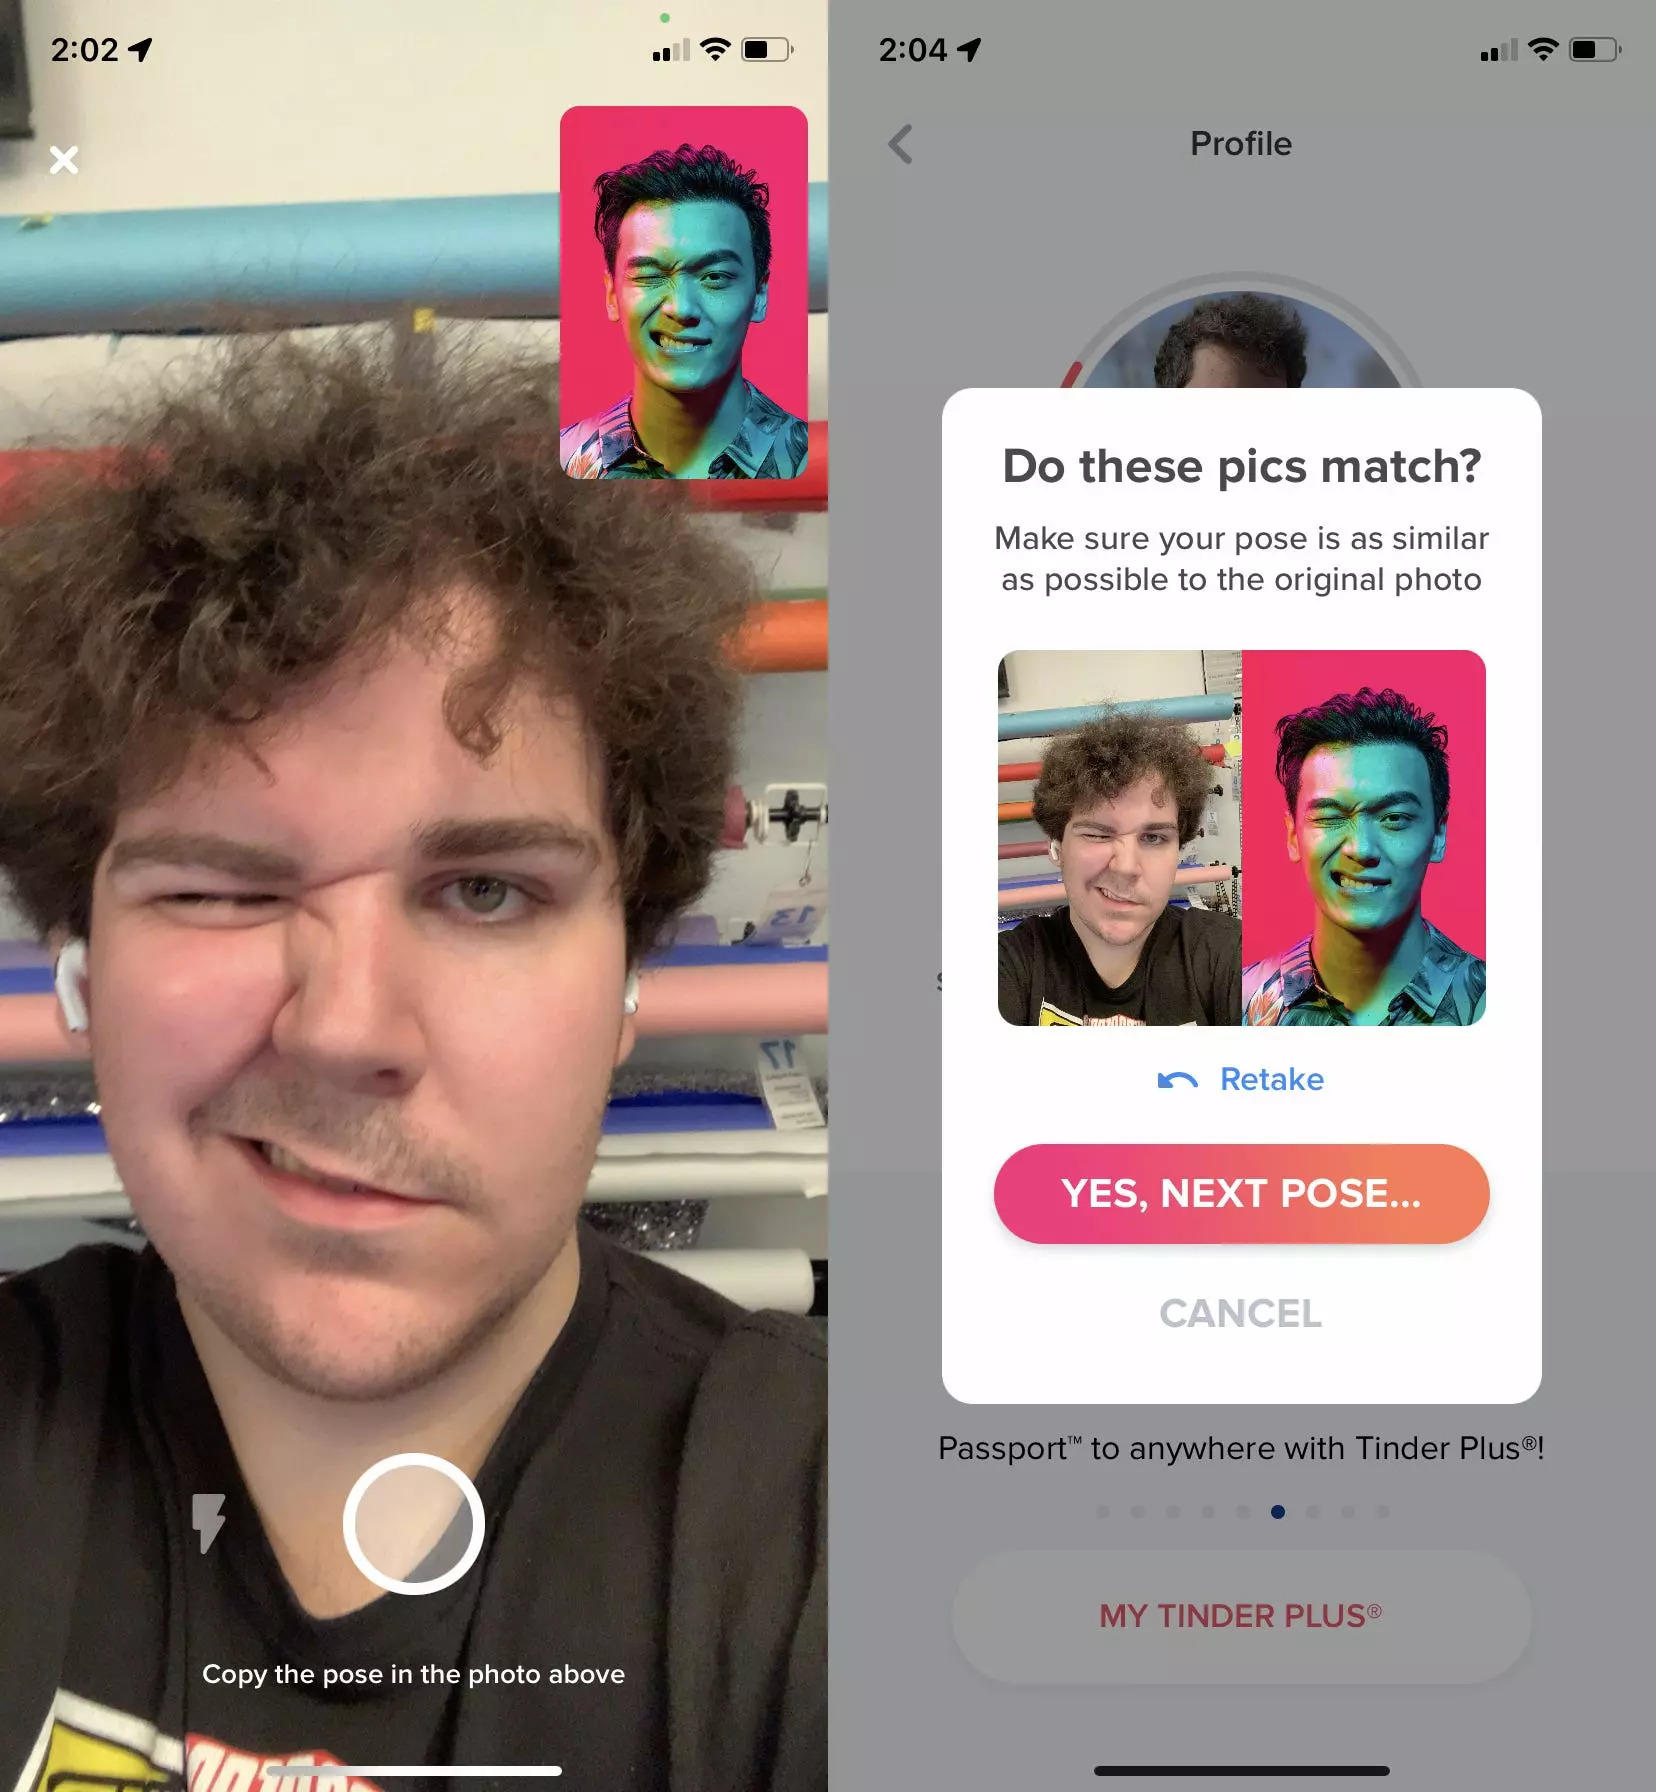 The process to get verified on Tinder, with the user winking to match a model